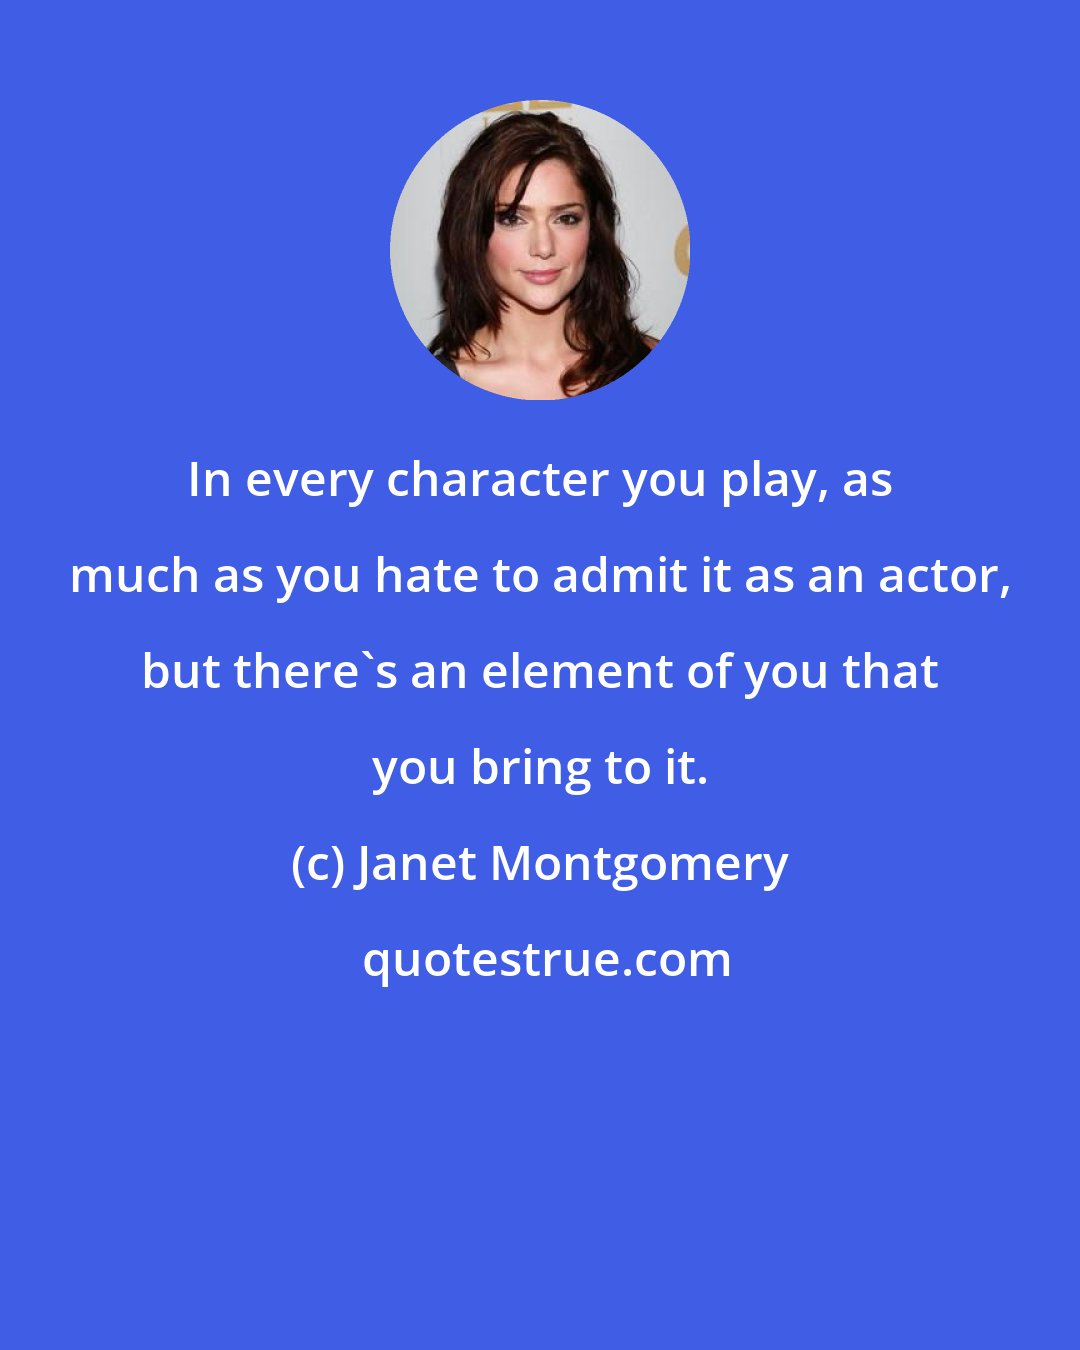 Janet Montgomery: In every character you play, as much as you hate to admit it as an actor, but there's an element of you that you bring to it.